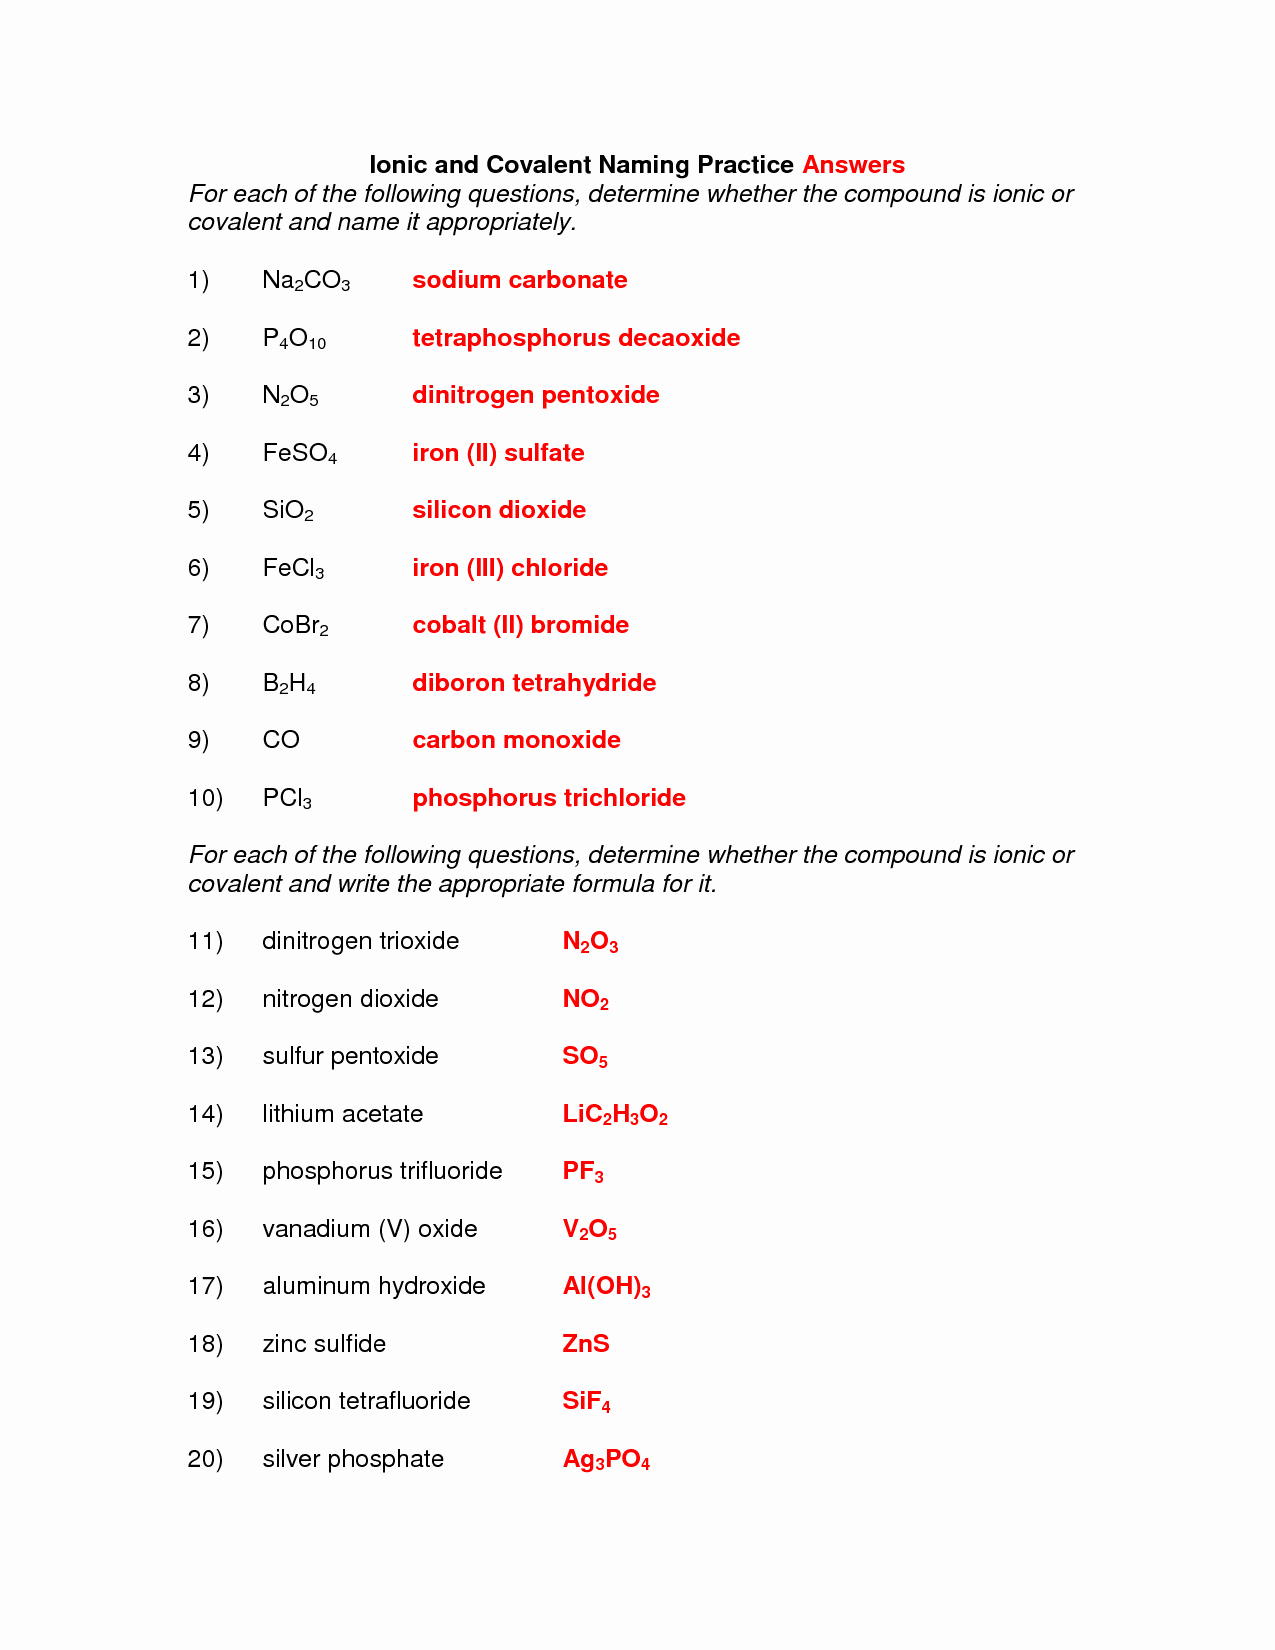 Ionic and Covalent Bonding Worksheet New Ionic and Covalent Bonding Practice Worksheet Answers